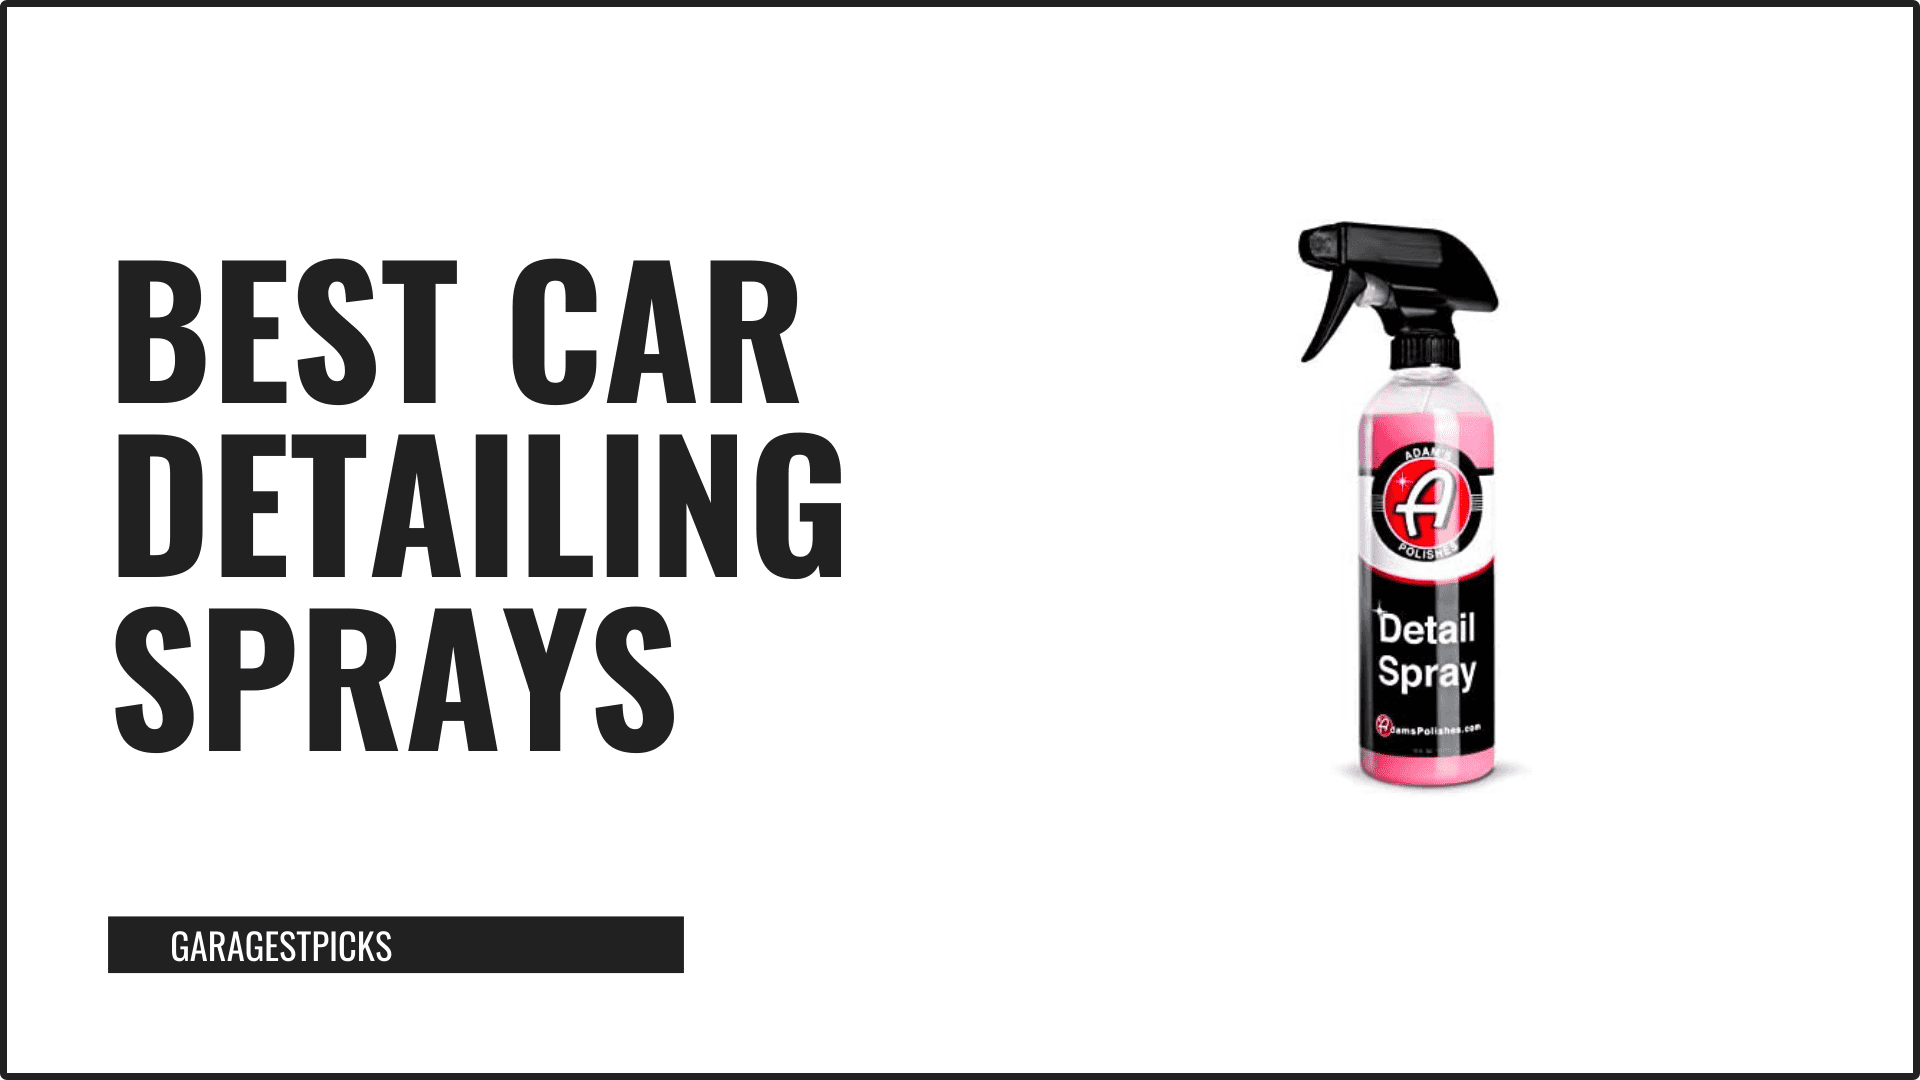 best car detailing sprays in black text on white background with image of car detailing spray bottle